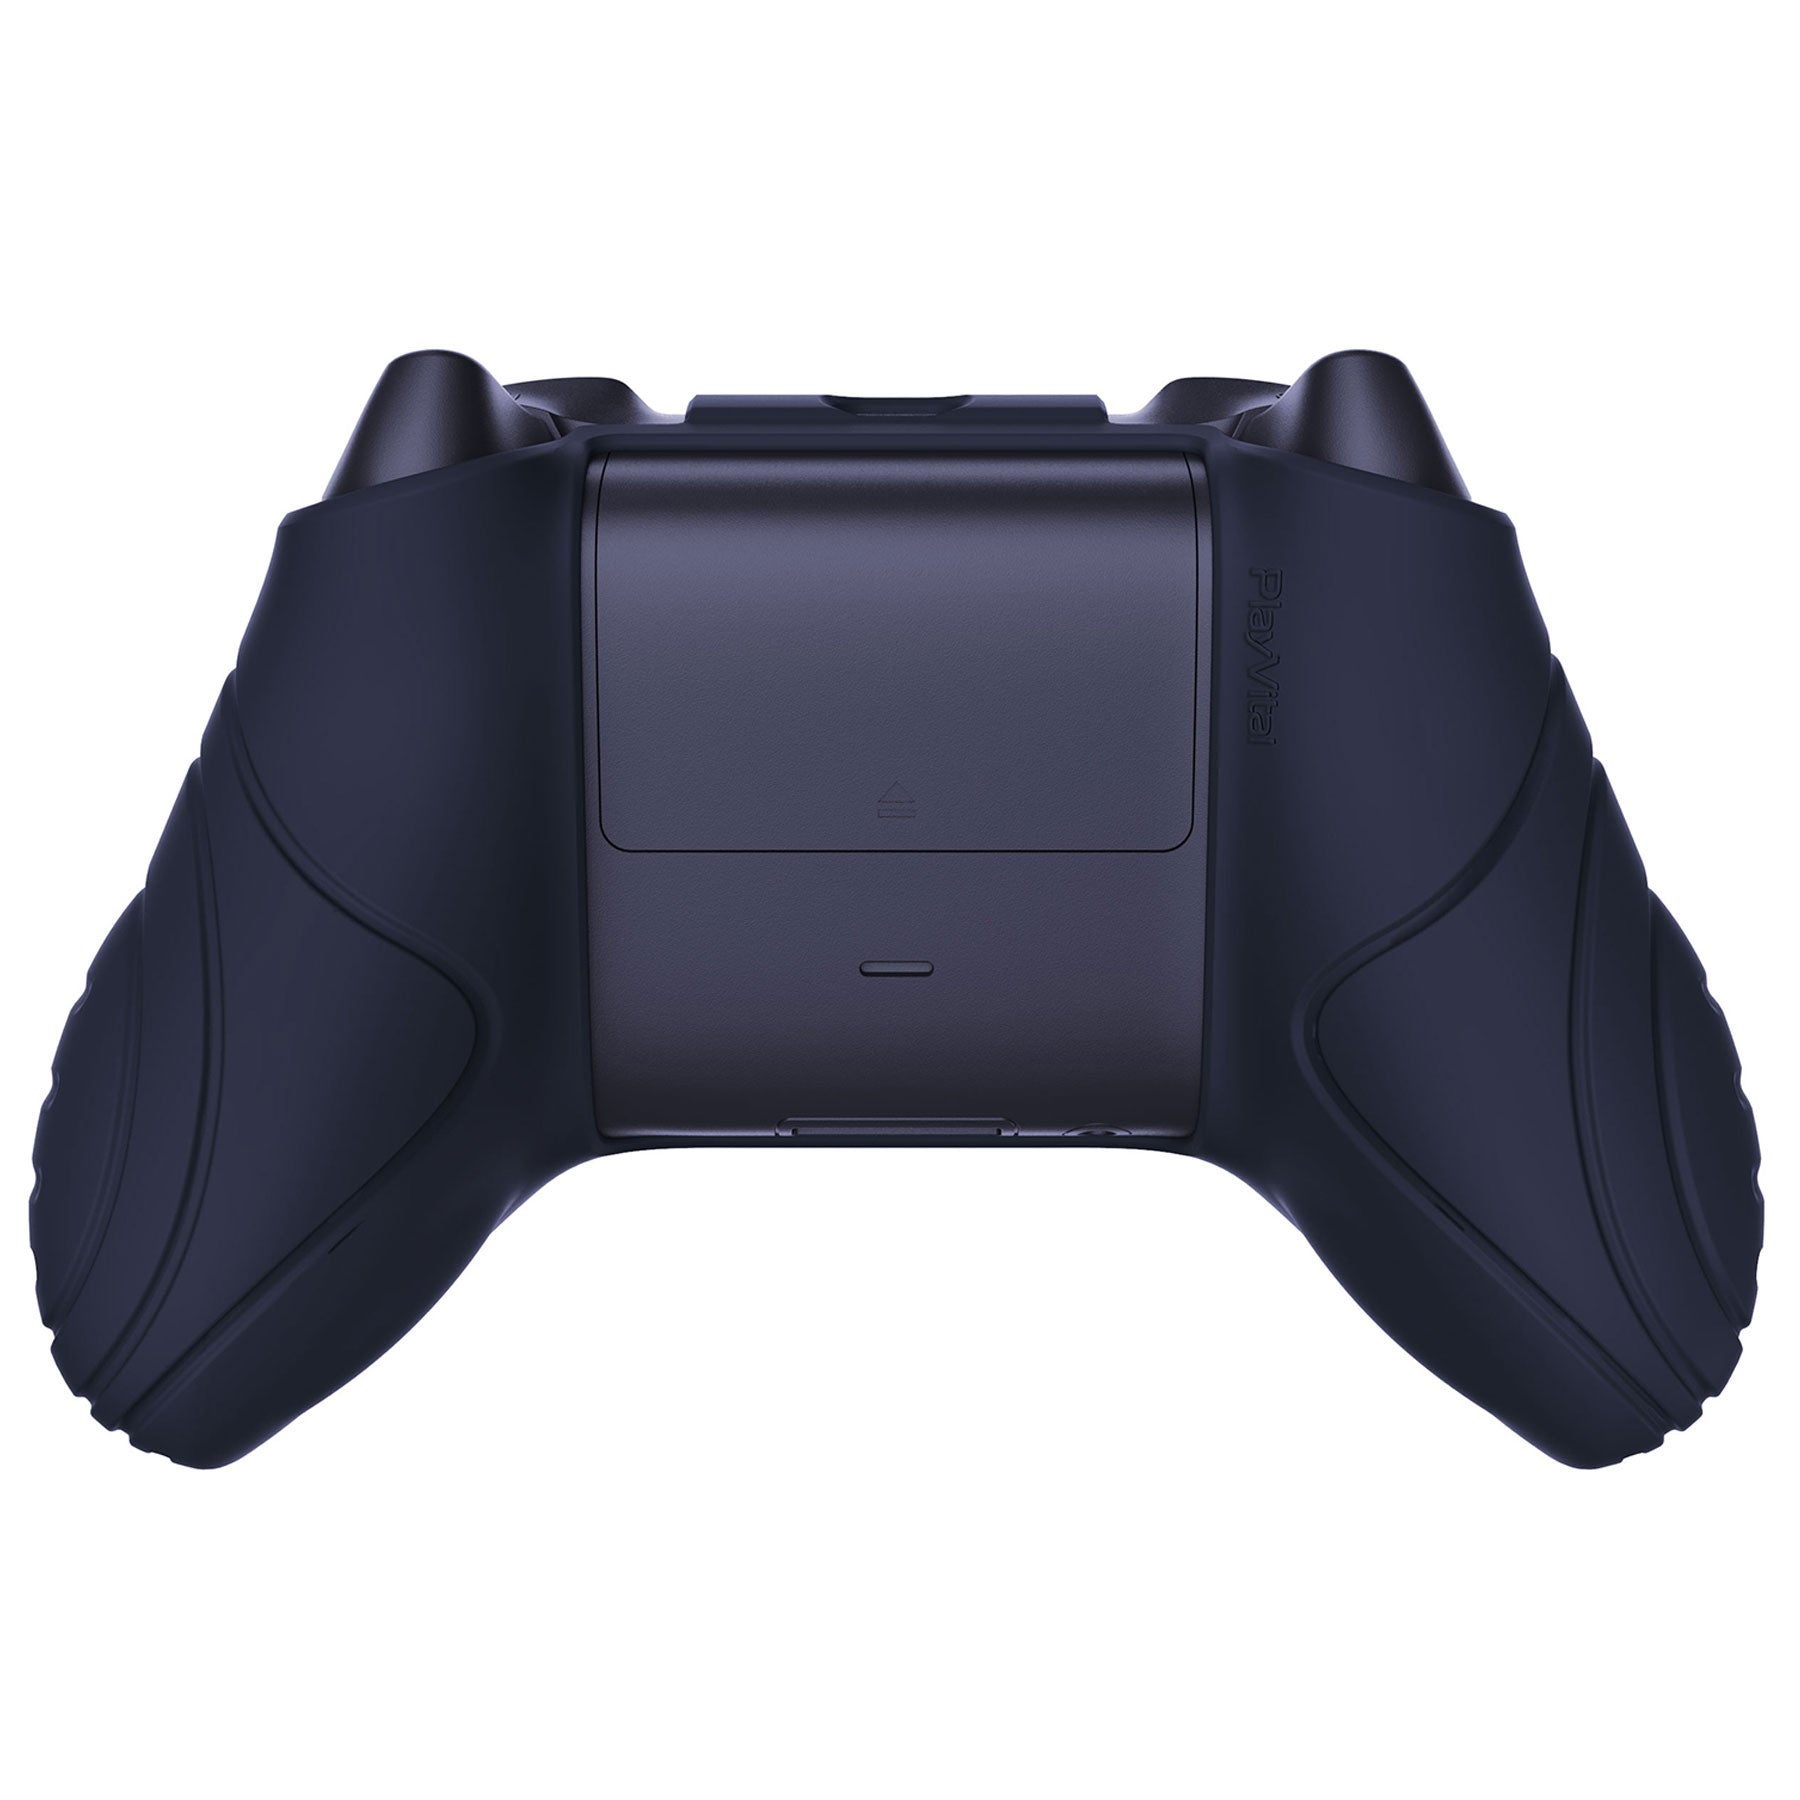 PlayVital Samurai Edition Midnight Blue Anti-slip Controller Grip Silicone Skin, Ergonomic Soft Rubber Protective Case Cover for Xbox Series S/X Controller with Black Thumb Stick Caps - WAX3003 PlayVital